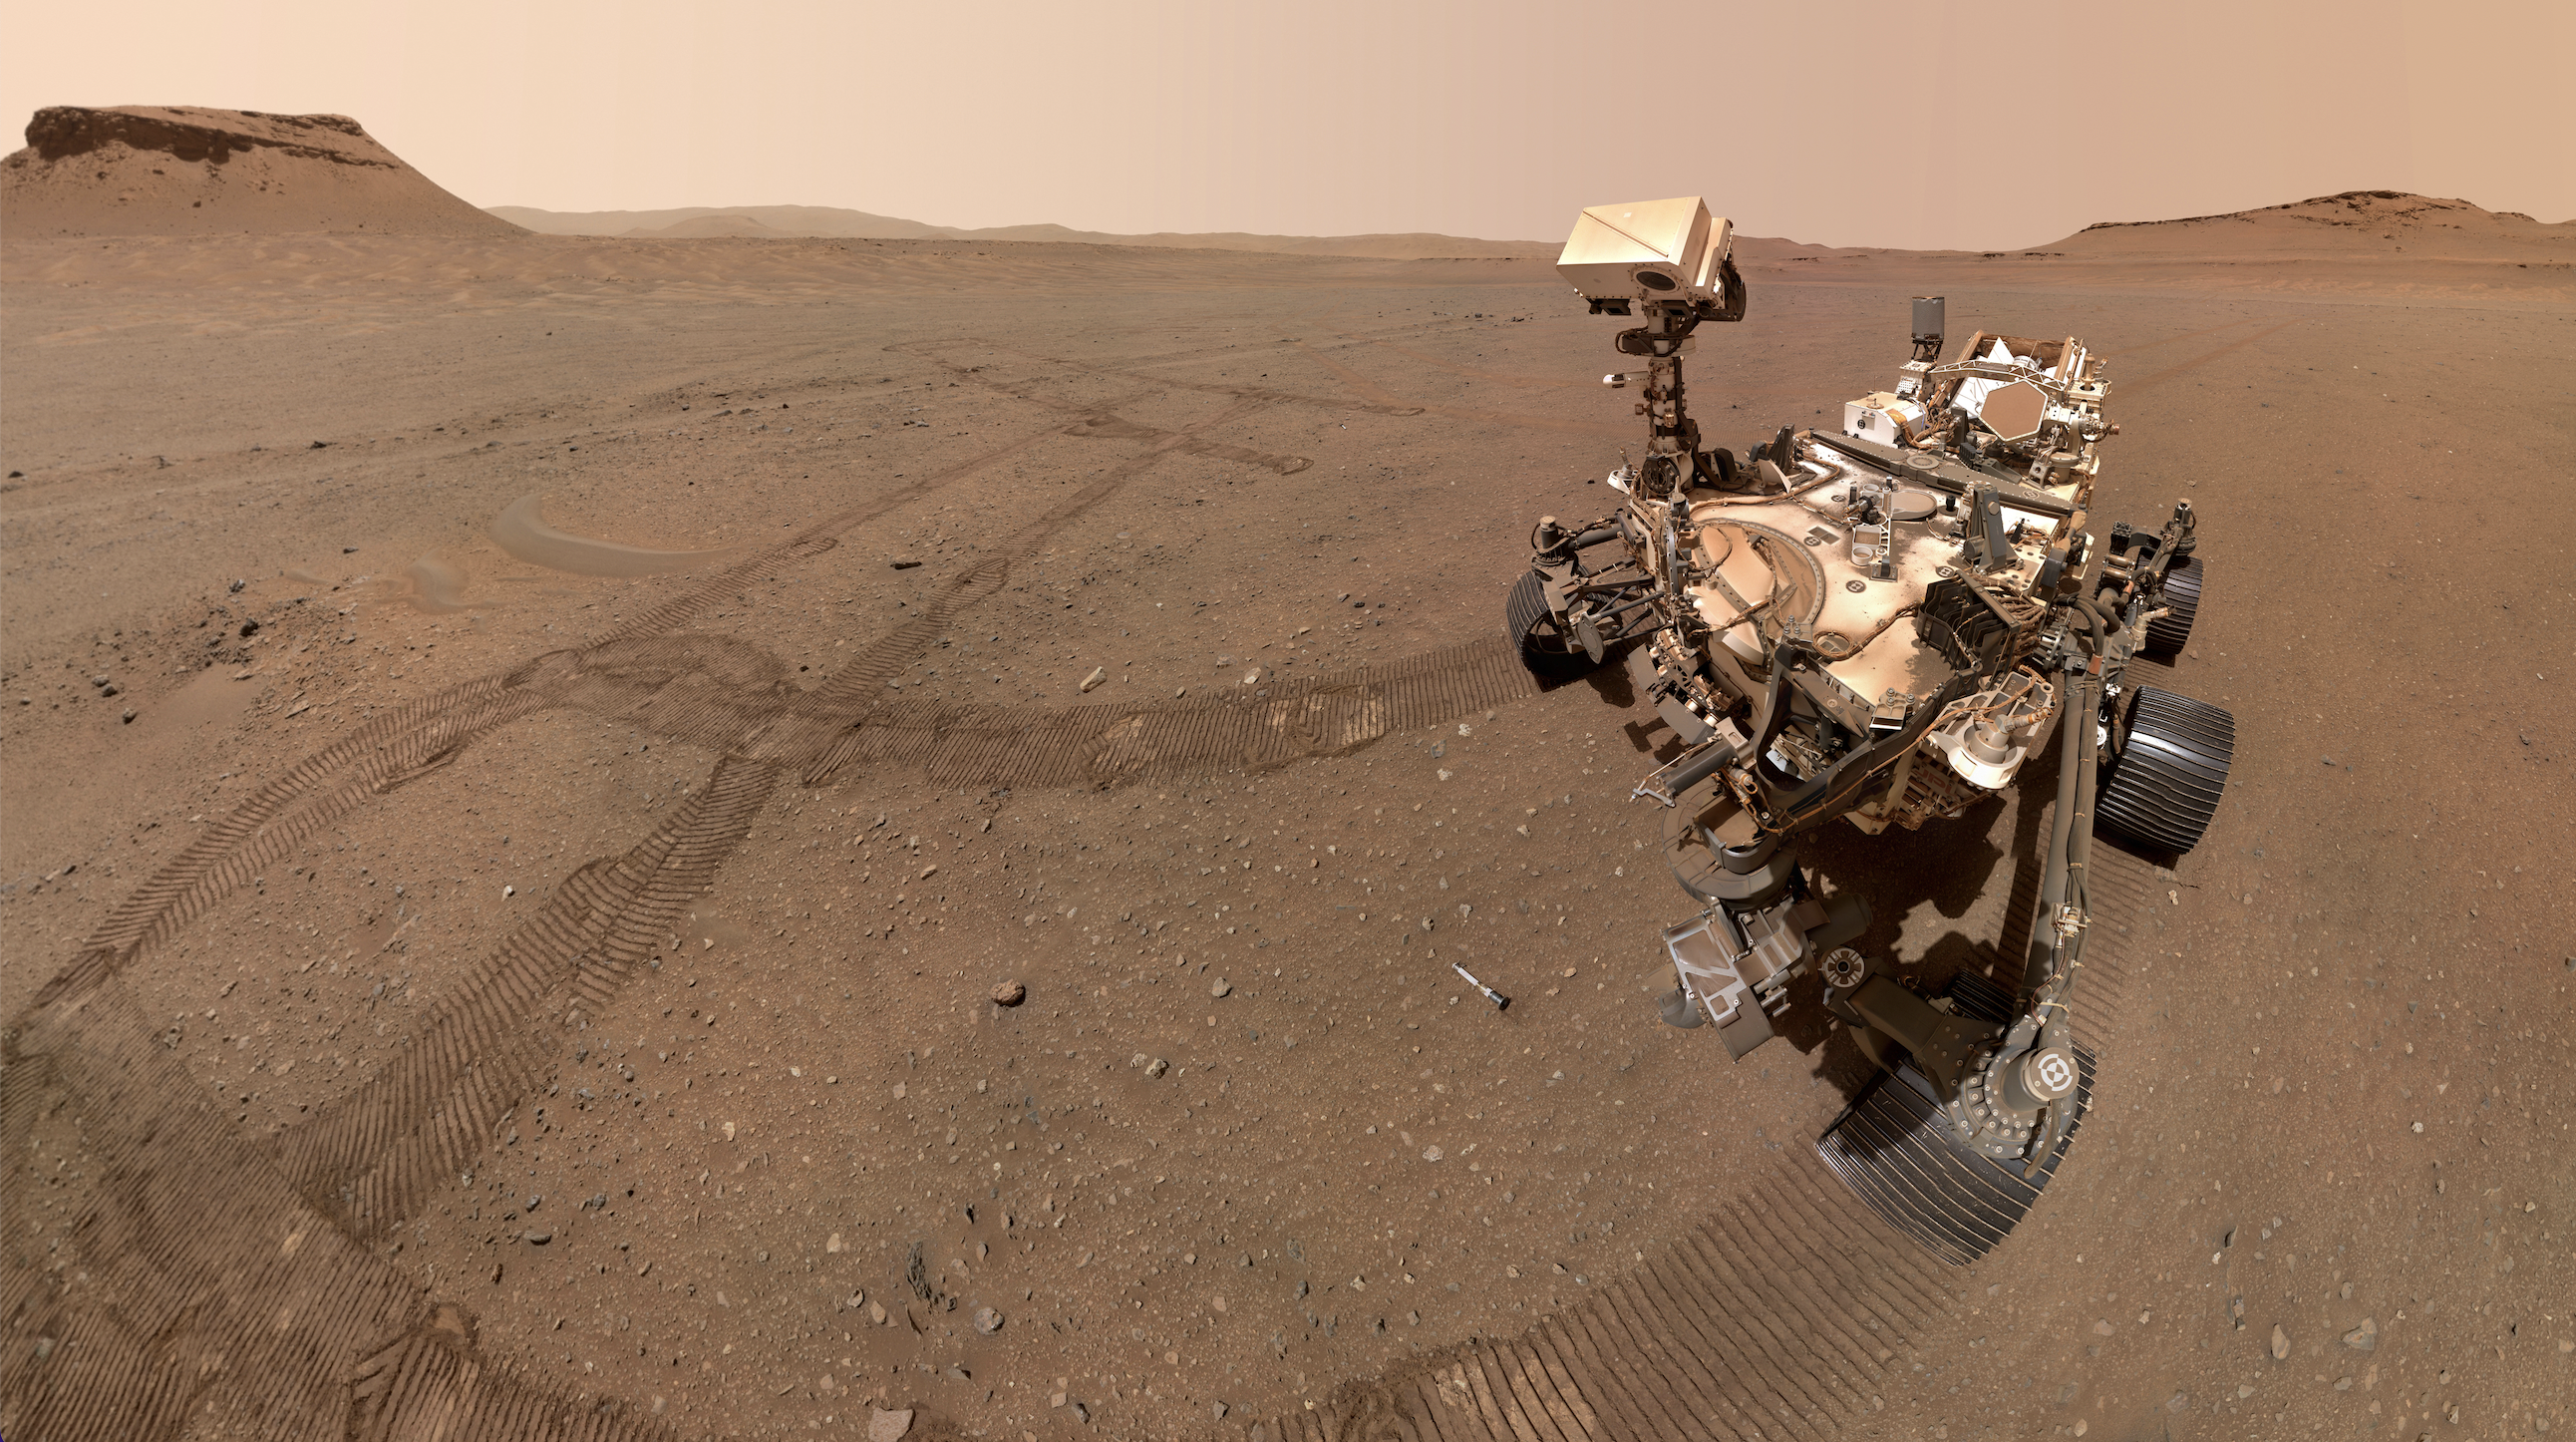 Signs of Mars life may be too elusive for rovers to detect